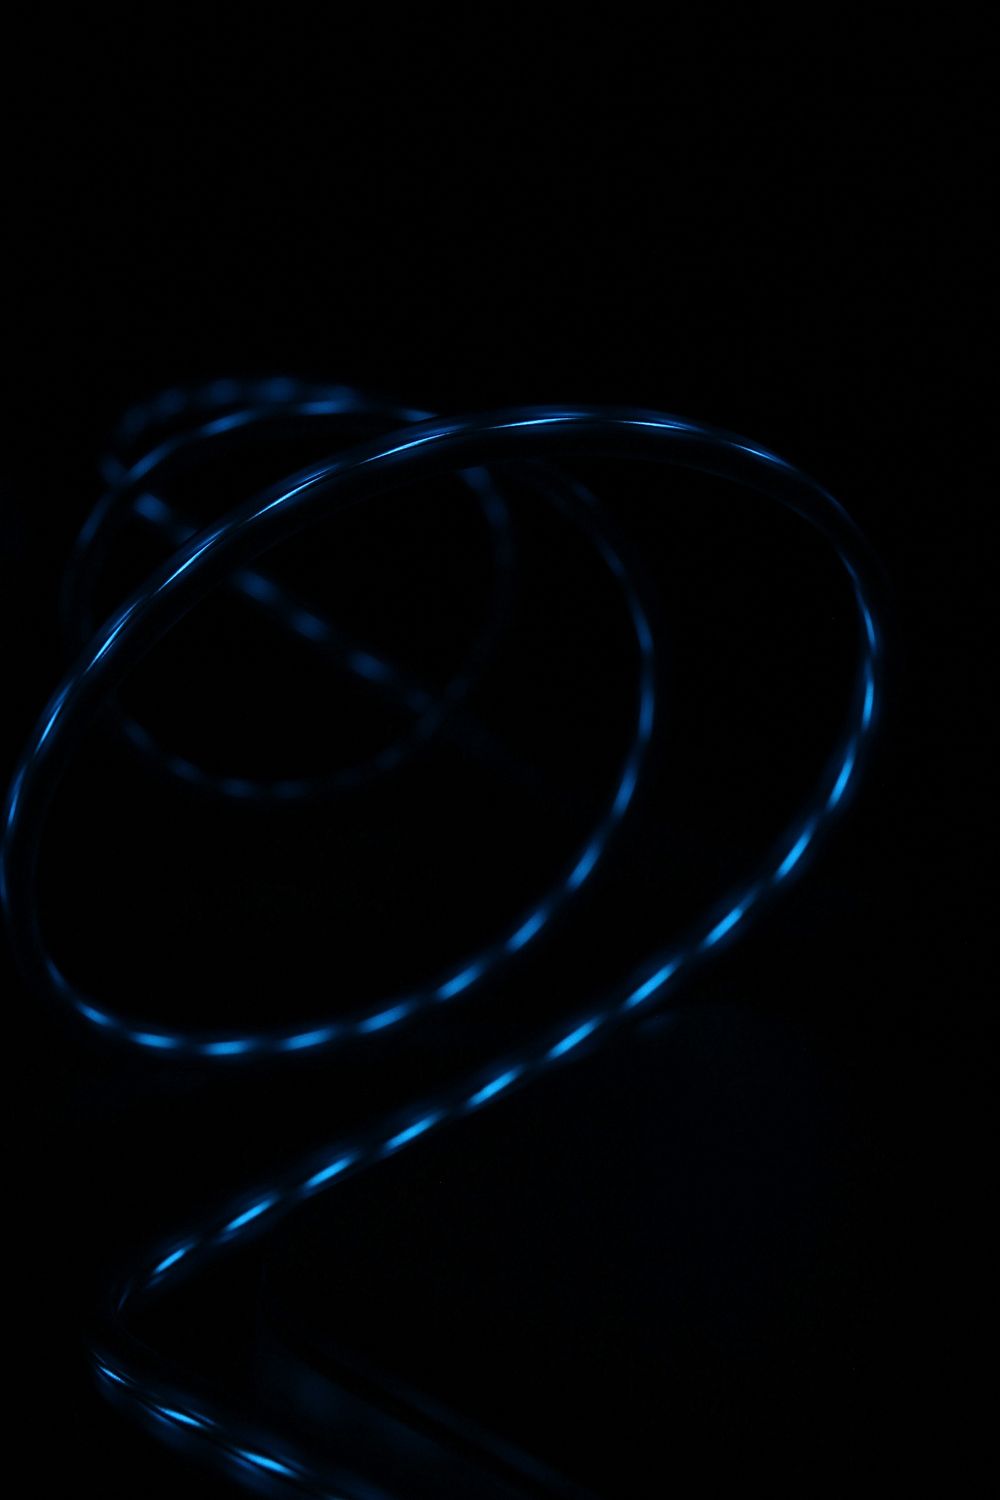 Blue light reflected in the glossy surface of a swirling wire. Original public domain image from Wikimedia Commons